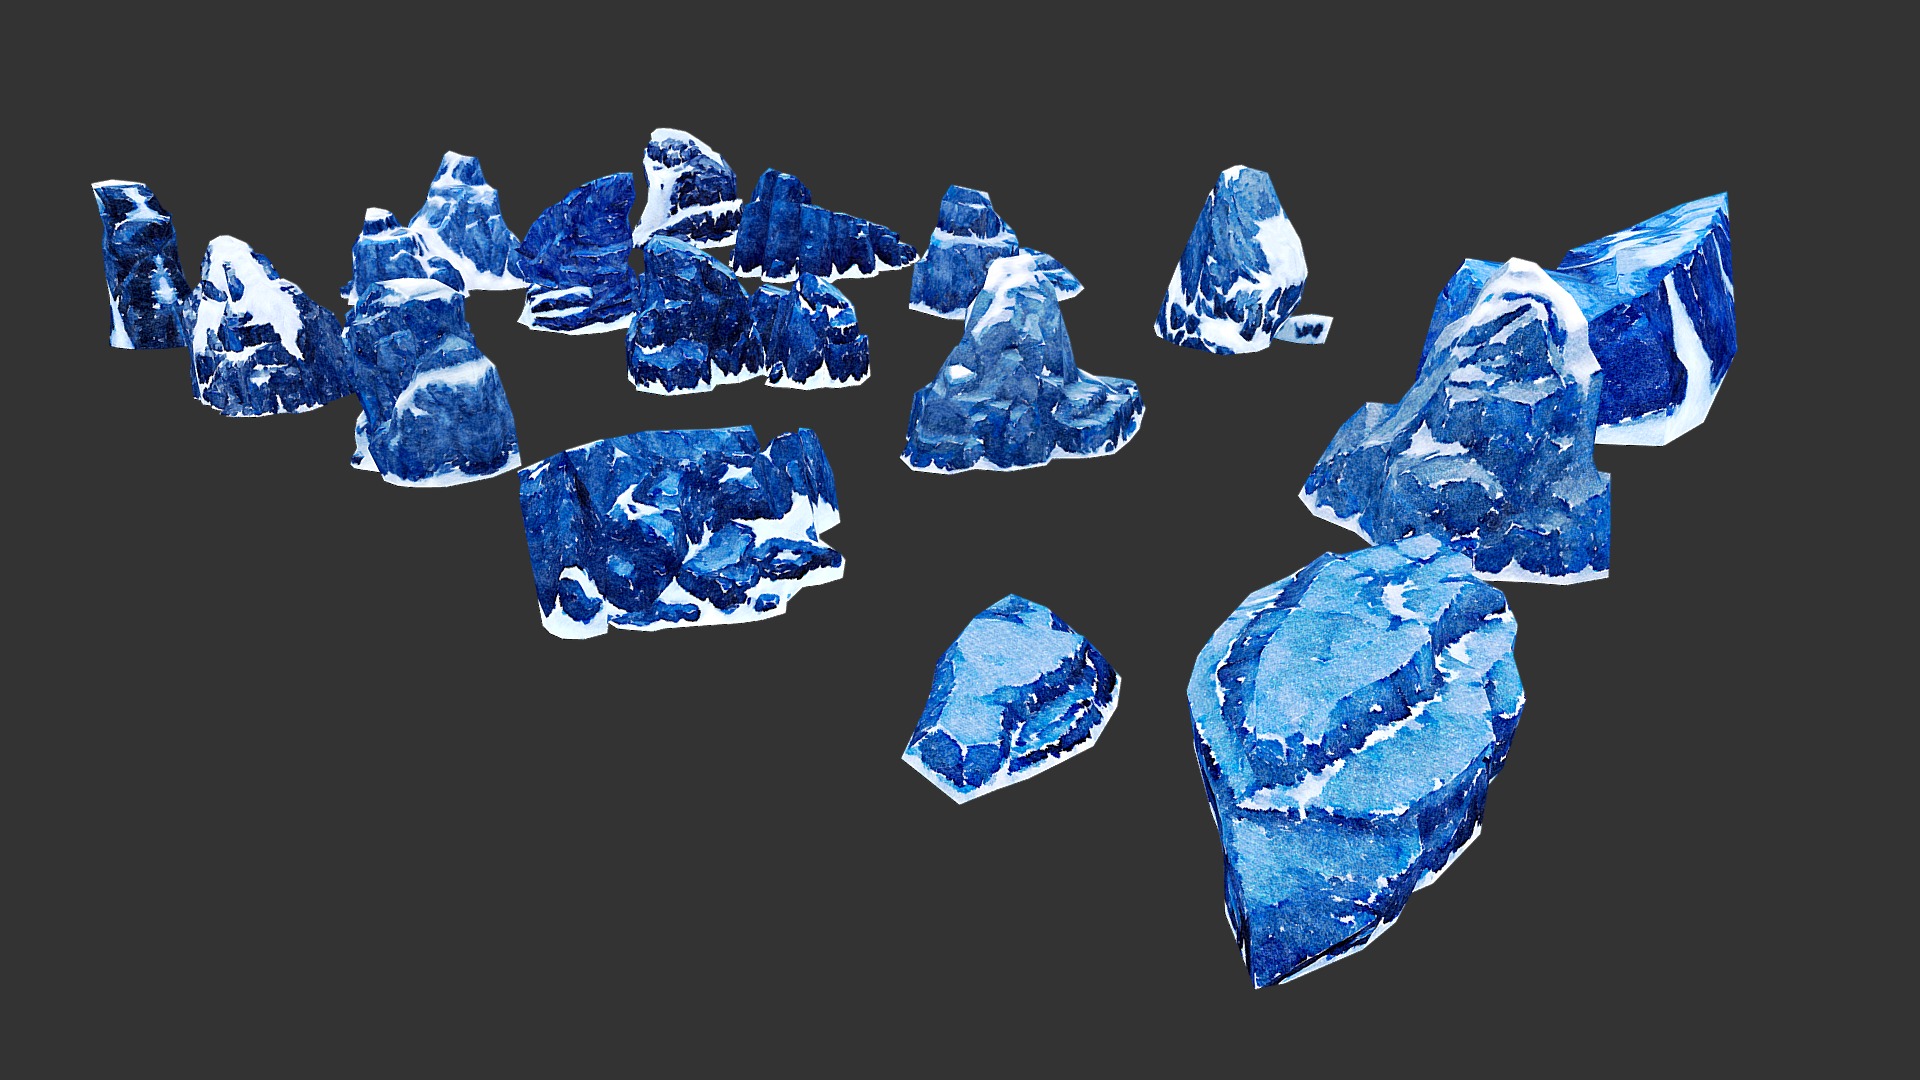 A package of low polygonal Rocks.The package contains 15 objects

Rock 1: 230 Poly, 140 Vert
Rock 2: 425 Poly, 373 Vert
Rock 3: 444 Poly, 292 Vert
Rock 4: 271 Poly, 202 Vert
Rock 5: 247 Poly, 176 Vert
Rock 6: 134 Poly, 47 Vert
Rock 7: 230 Poly, 144 Vert
Rock 8: 385 Poly, 285 Vert
Rock 9: 384 Poly, 261 Vert
Rock 10: 400 Poly, 355 Vert
Rock 11: 71 Poly, 54 Vert
Rock 12: 160 Poly, 146 Vert
Rock 13: 152 Poly, 103 Vert
Rock 14: 427 Poly, 296 Vert
Rock 15: 352 Poly, 265 Vert




Only Textures Diffus duplicated in resolution 1024 x 1024. Format textures of PNG. Files include: 3Dsmax, 3Ds, Obj, Fbx and folder with textures. Ready import to game project (Unity, Unreal)
If there is a need for any type of model, send a message! We will provide. 
Thanks for your interest and love! 



Note: Watercolor style illustrations 
It is recommended to use flat lighting or shaderless material - Stone Illustration Part 6 - 3D model by josluat91 3d model